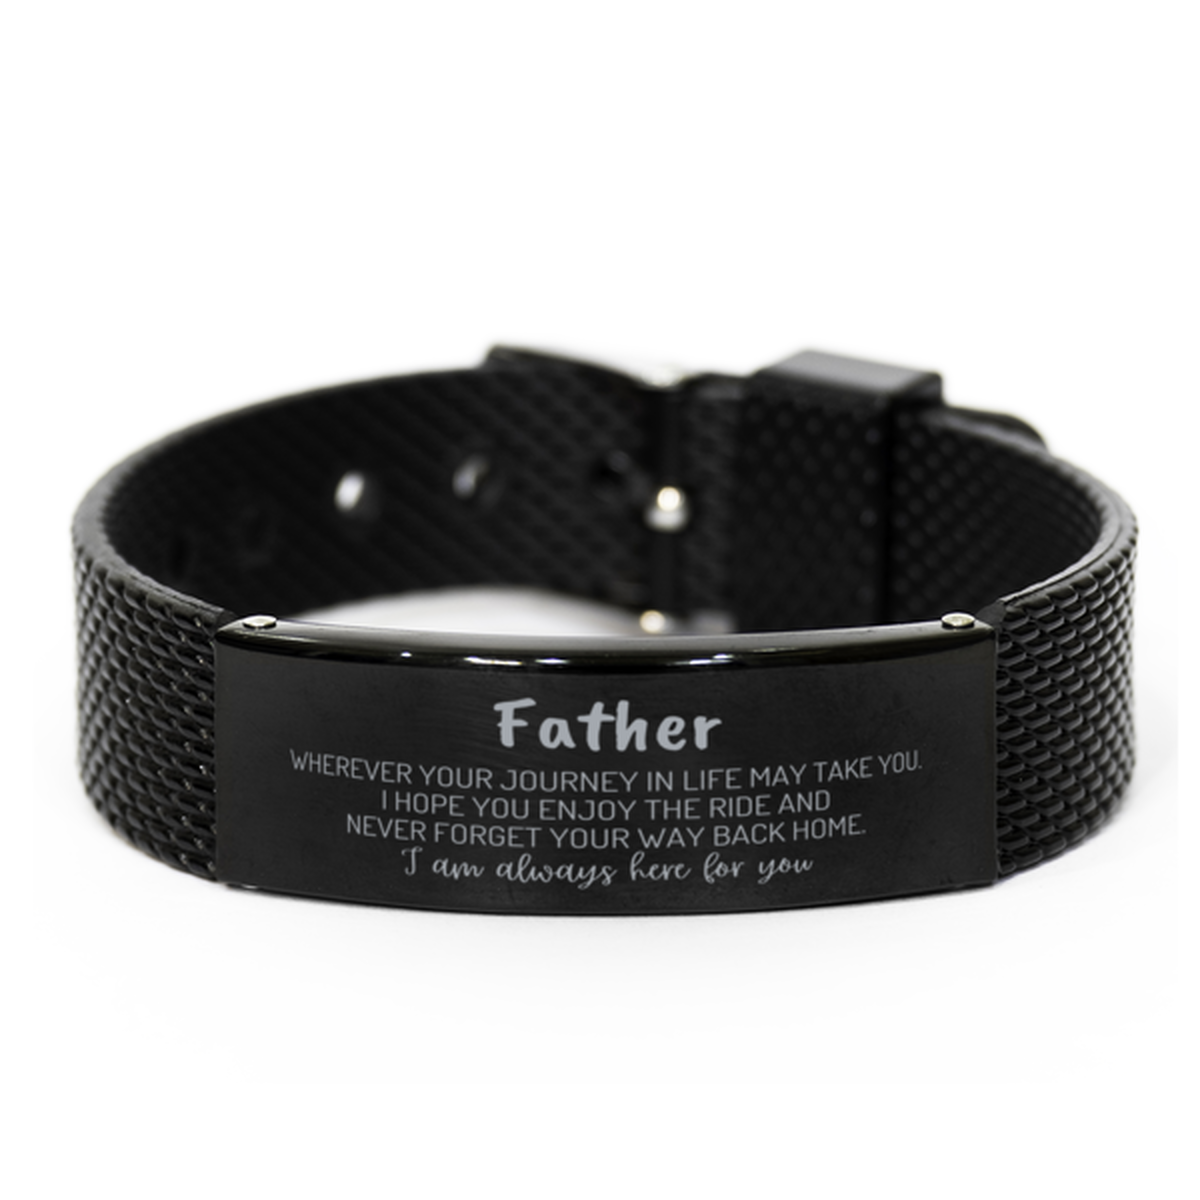 Father wherever your journey in life may take you, I am always here for you Father Black Shark Mesh Bracelet, Awesome Christmas Gifts For Father, Father Birthday Gifts for Men Women Family Loved One